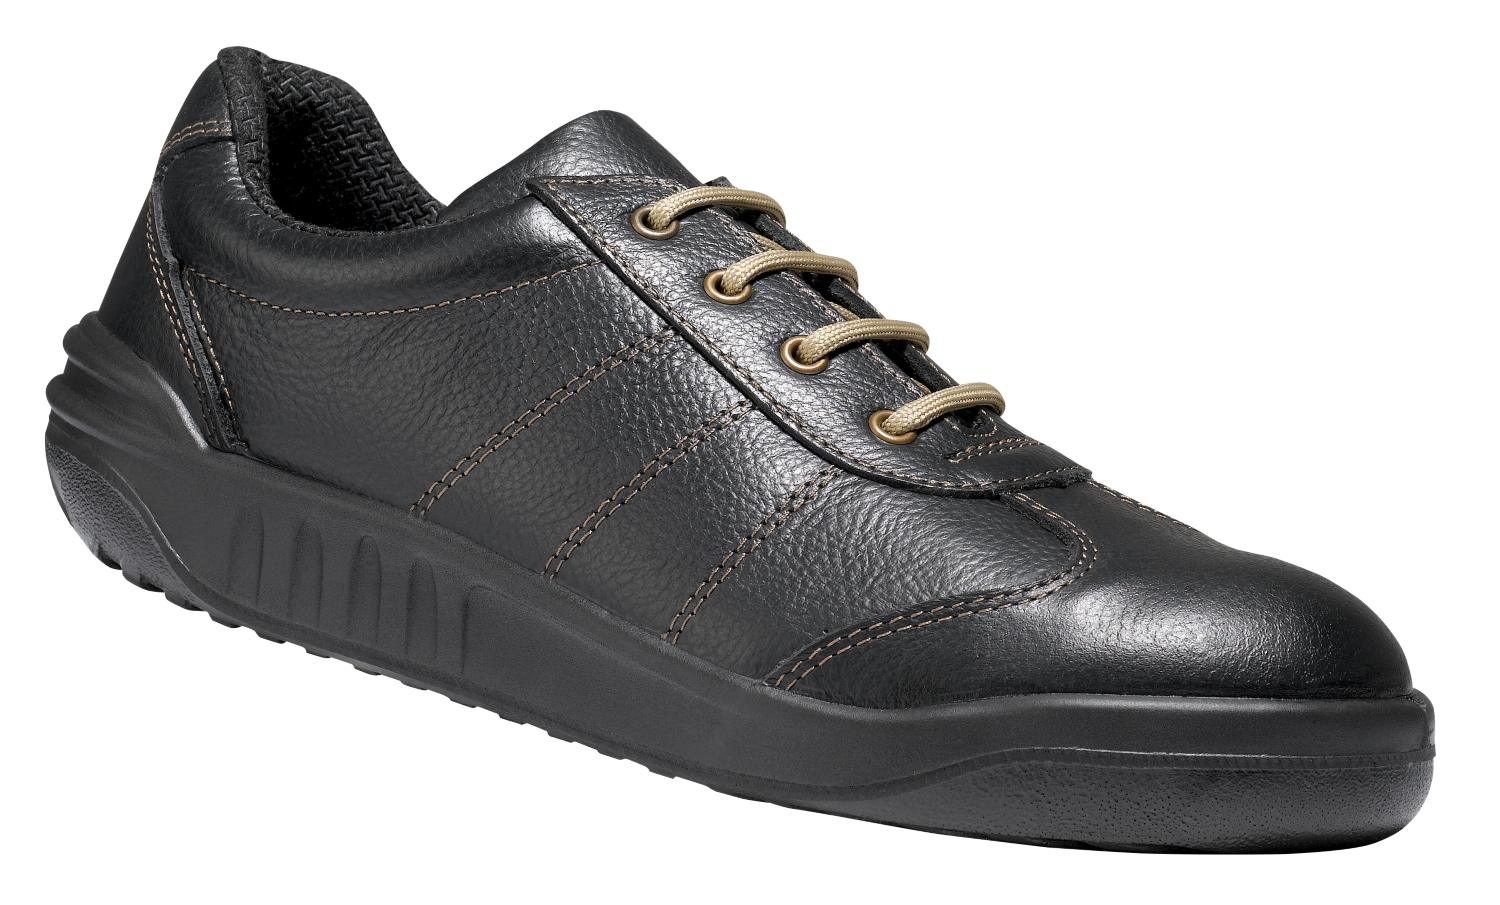 Chaussures basses Josia - S3 Parade 